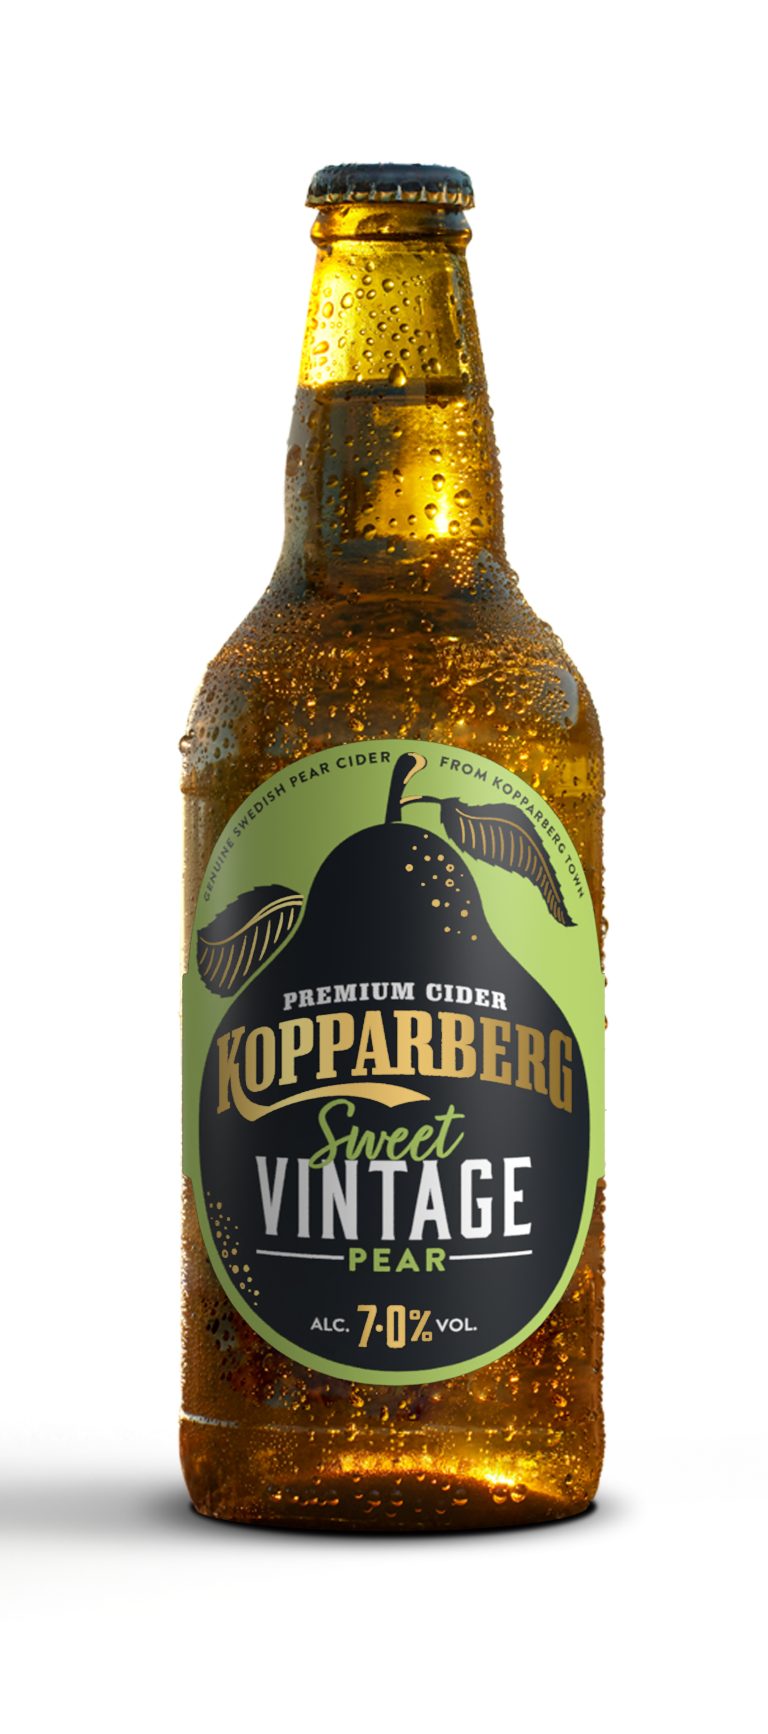 Kopparberg new Sweet Vintage: a fresh take on classic pear cider